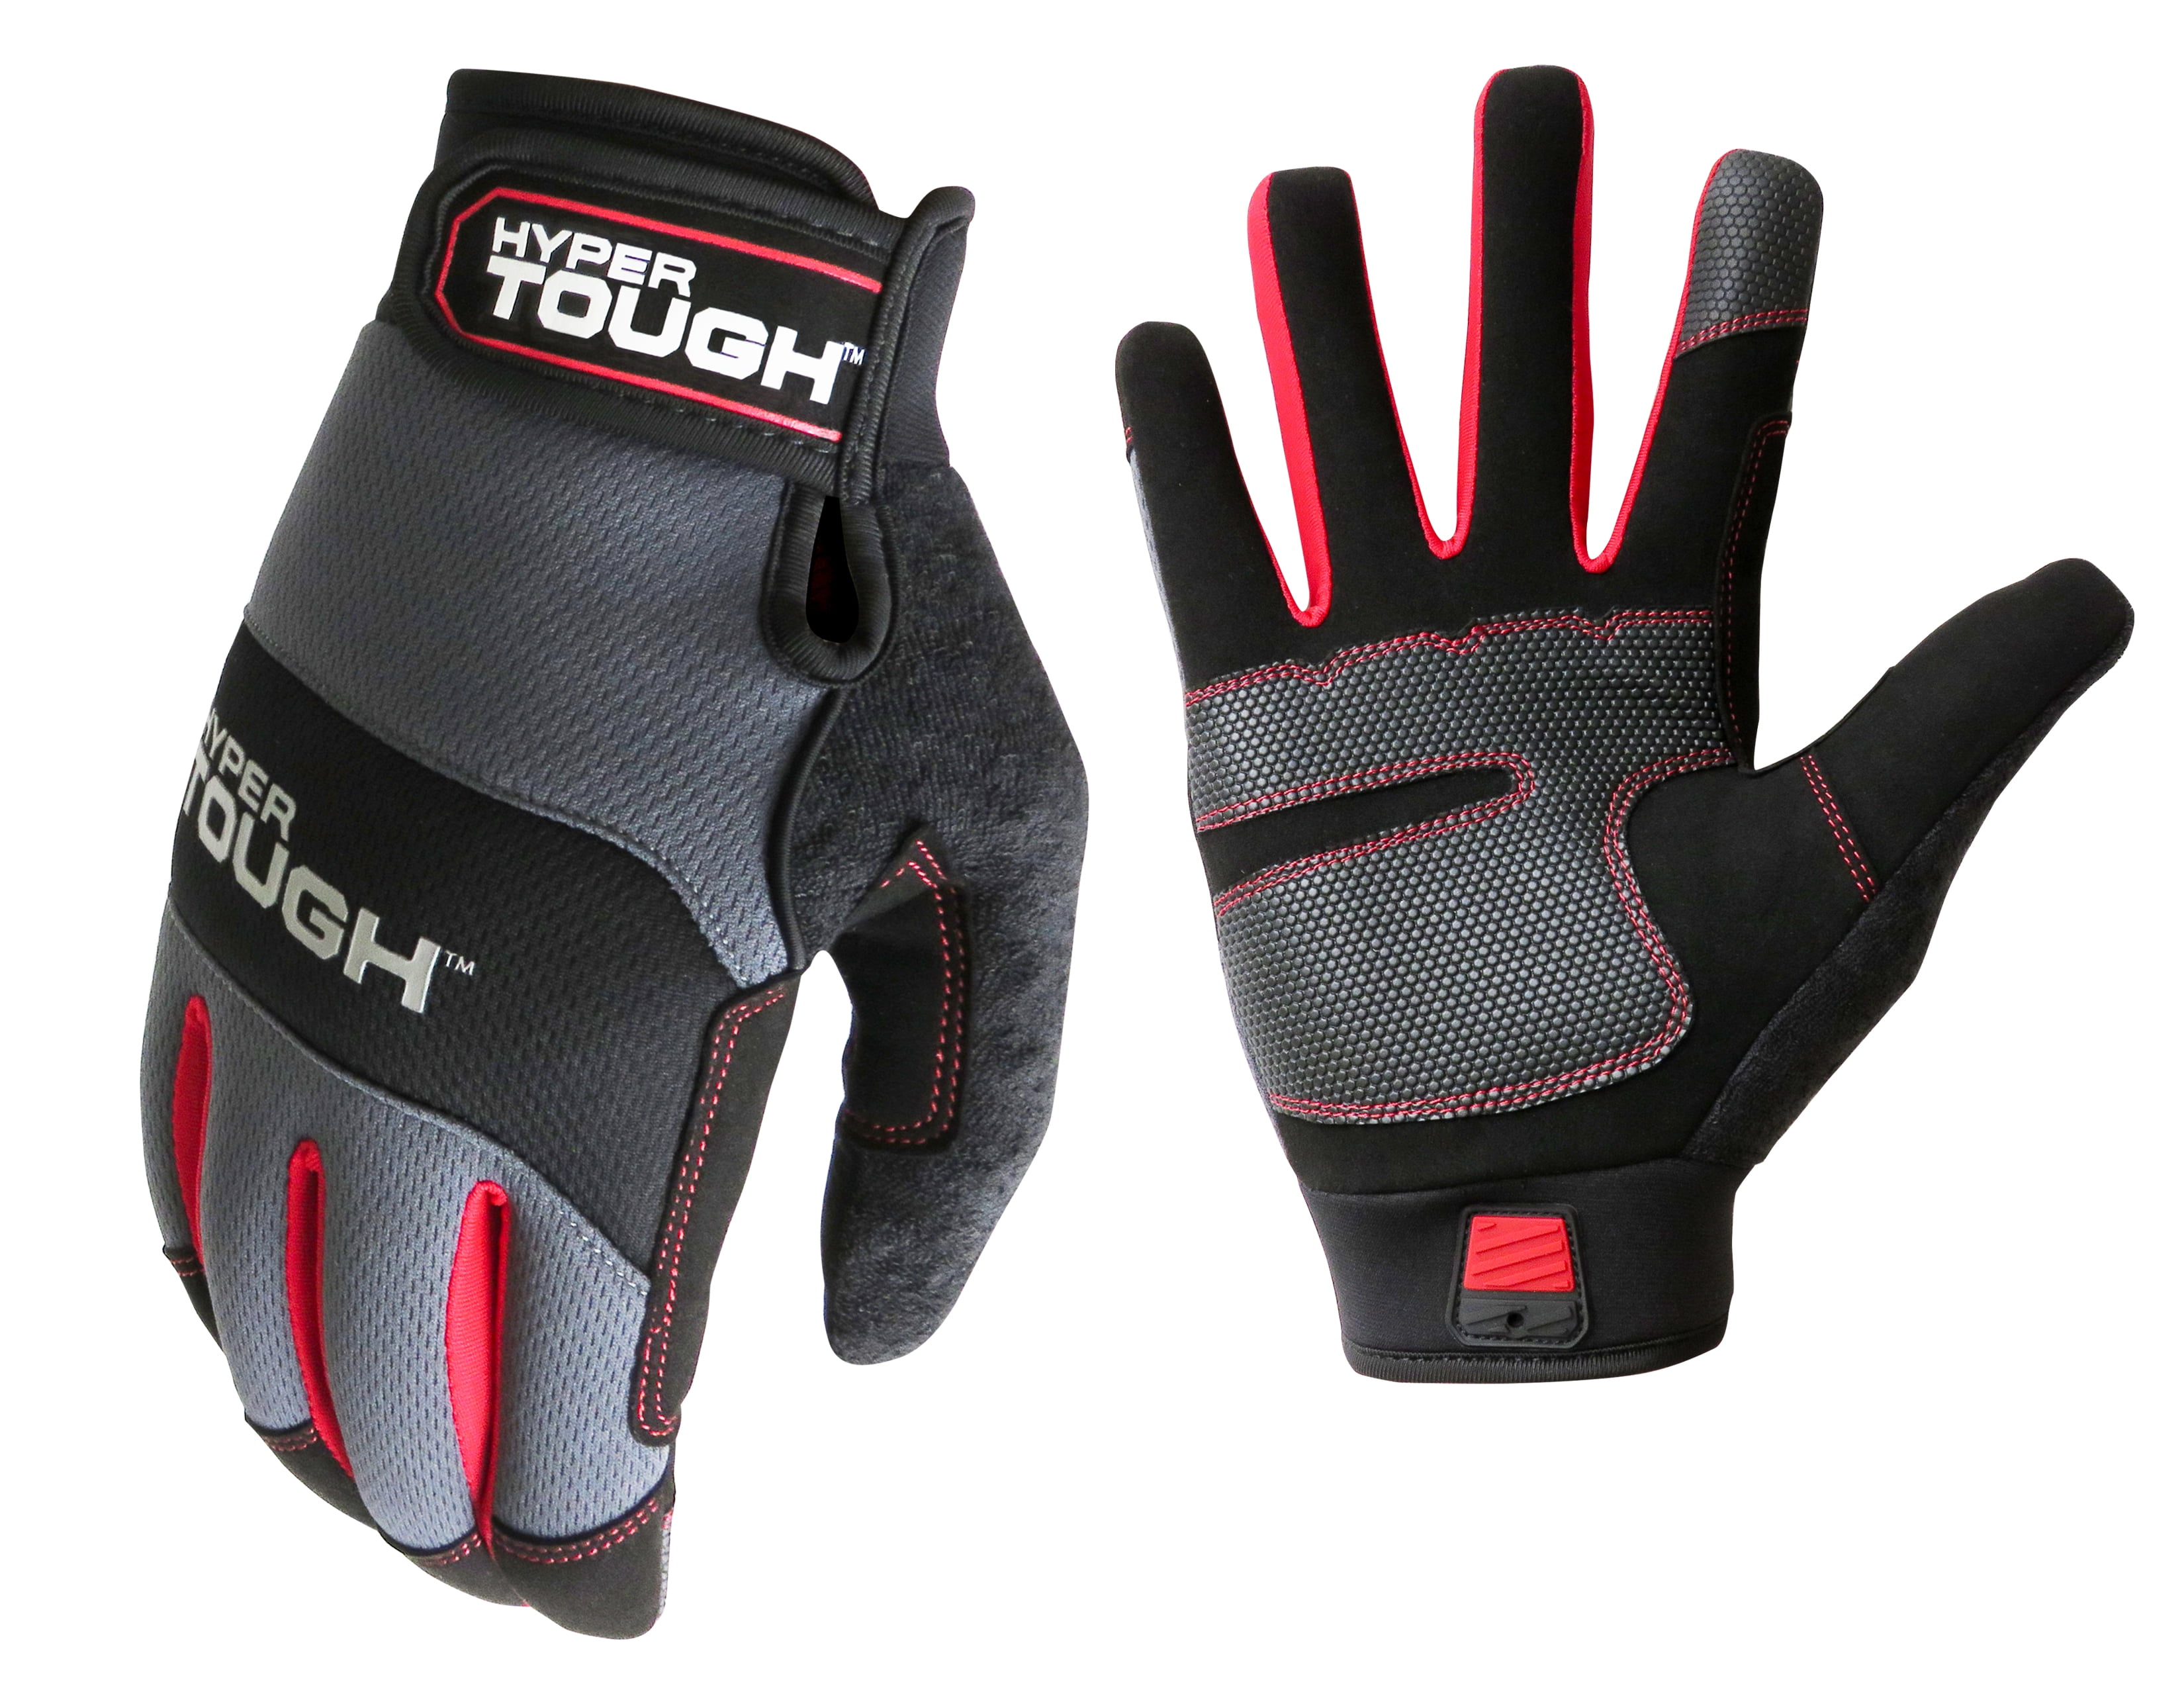 Hyper Tough High Dexterity General Purpose Work Glove, Mesh, Synthetic Leather Palm - Men's Large, Size: One Size